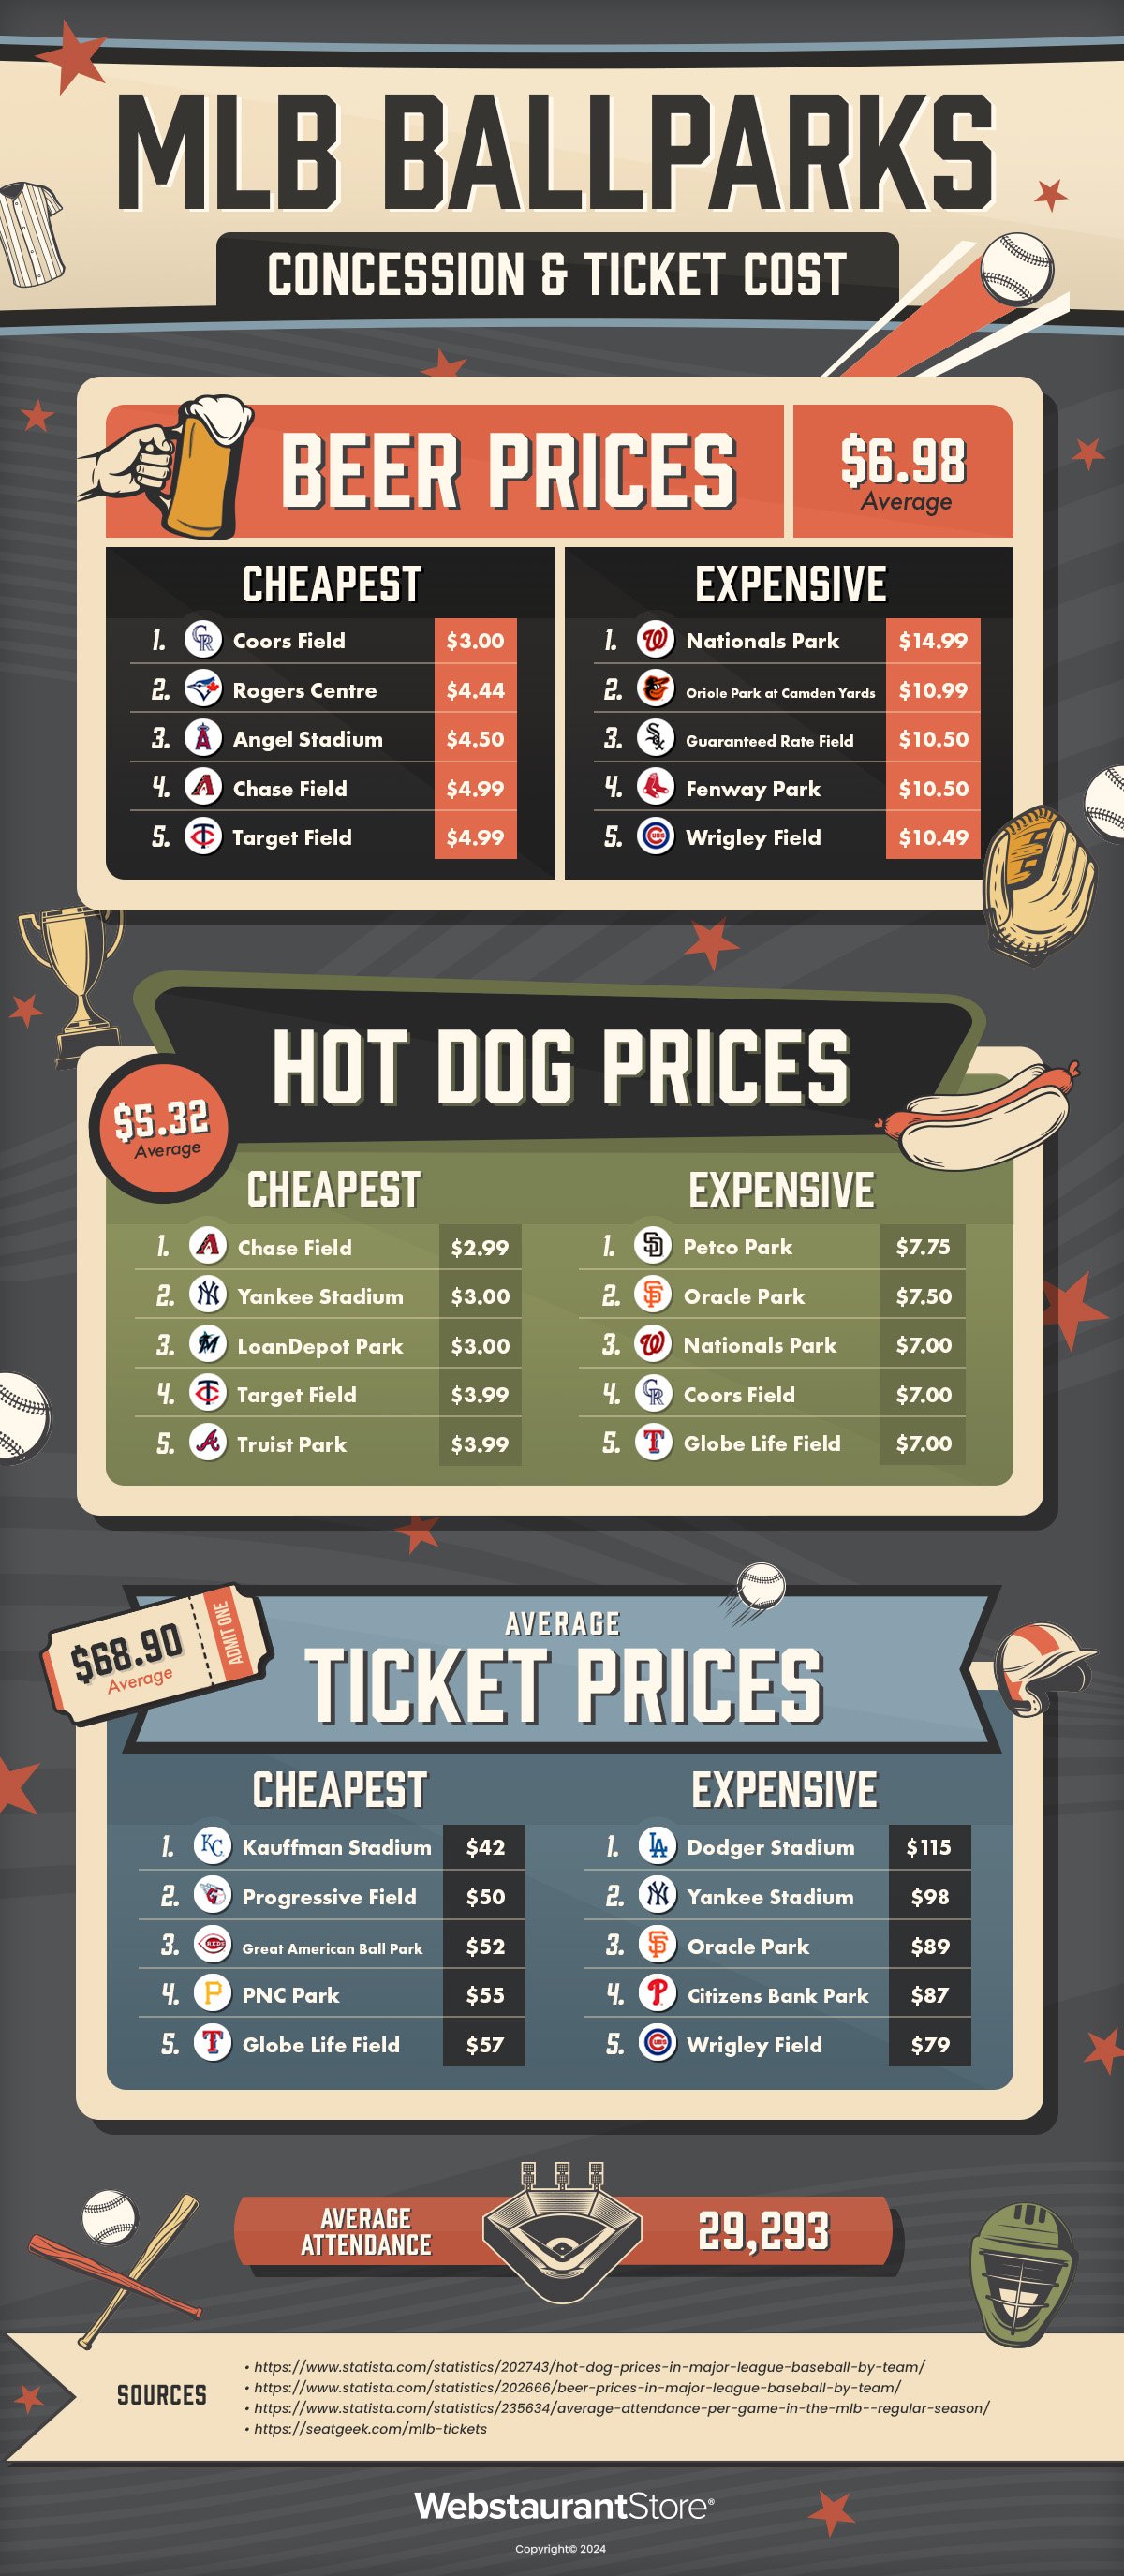 MLB Ballparks: Concession & Ticket Cost